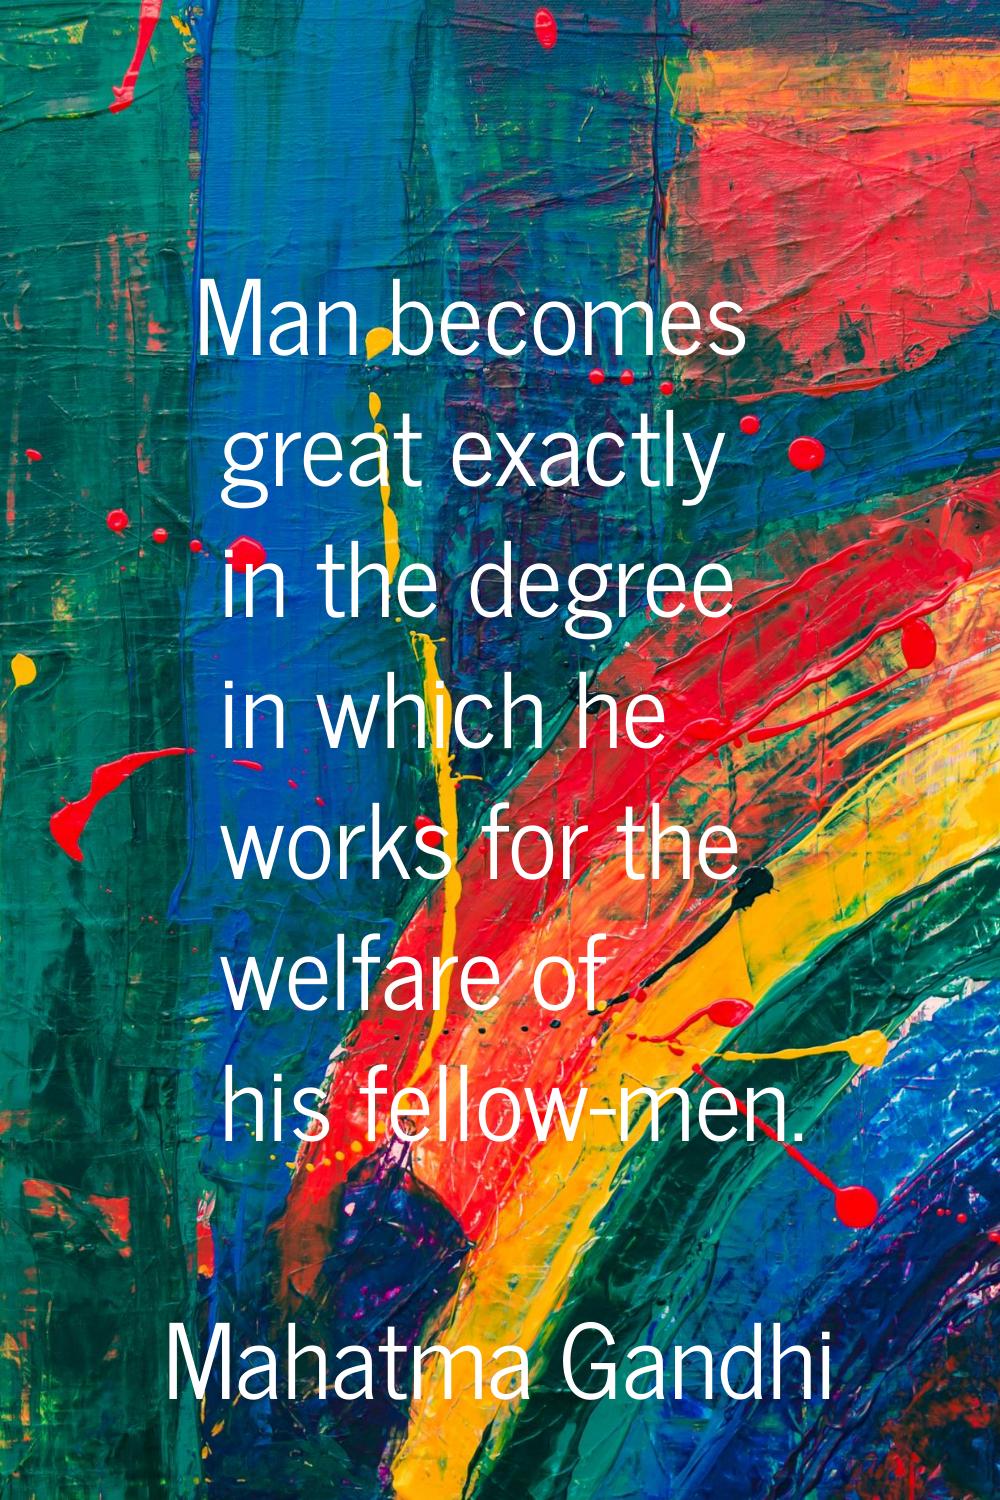 Man becomes great exactly in the degree in which he works for the welfare of his fellow-men.